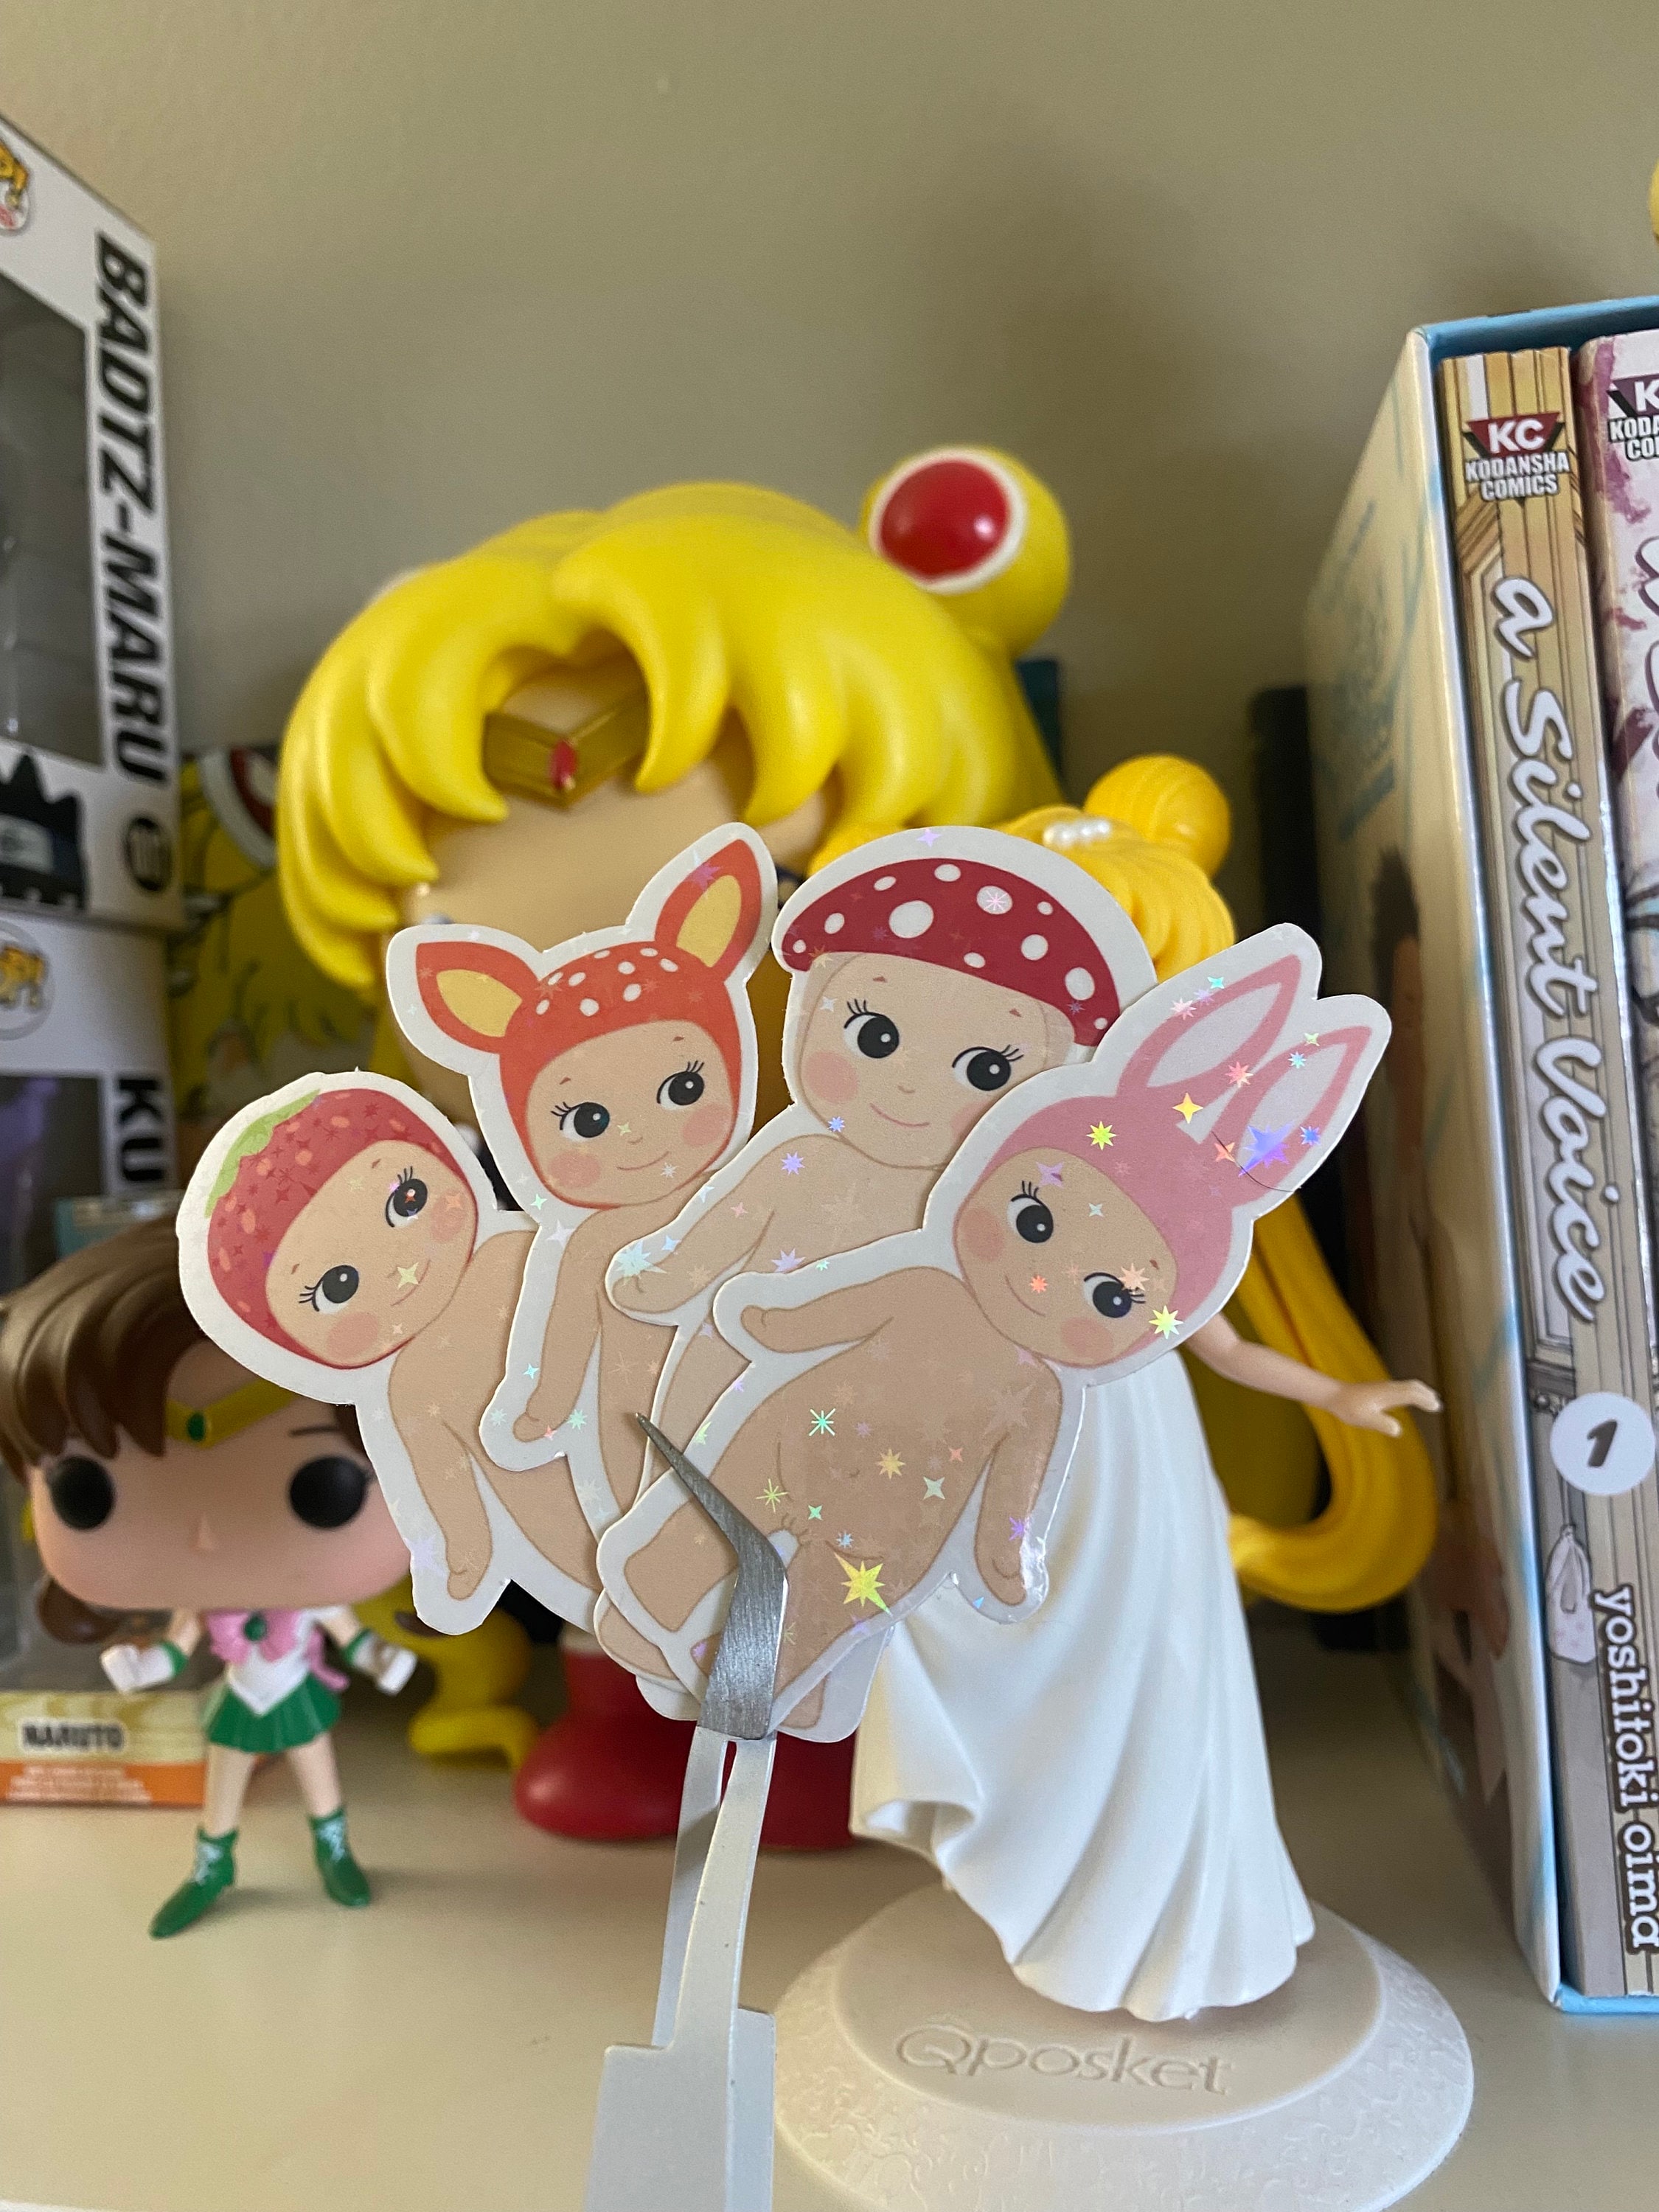 Sonny Angel Candy Series] die cut stickers, fanmade, tingi and set